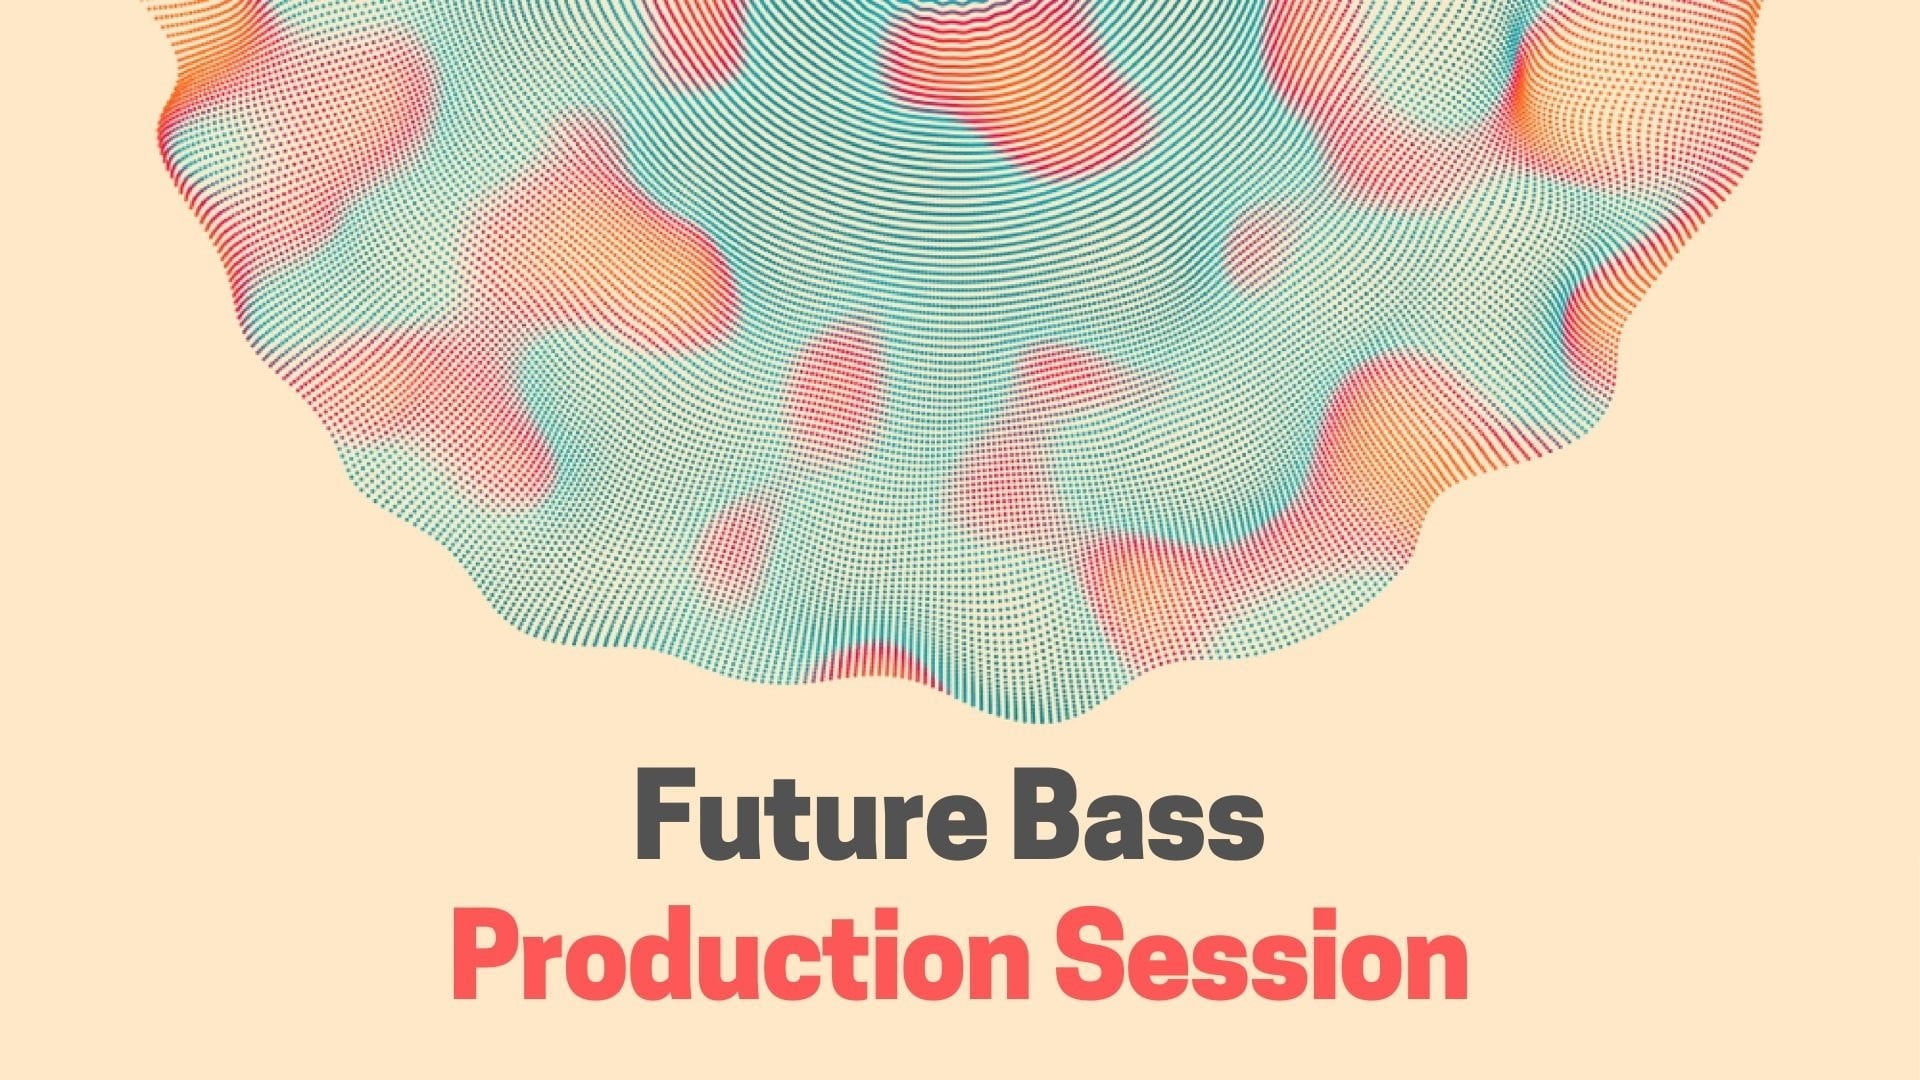 Future Bass Free Production Resources #1 - Oversampled